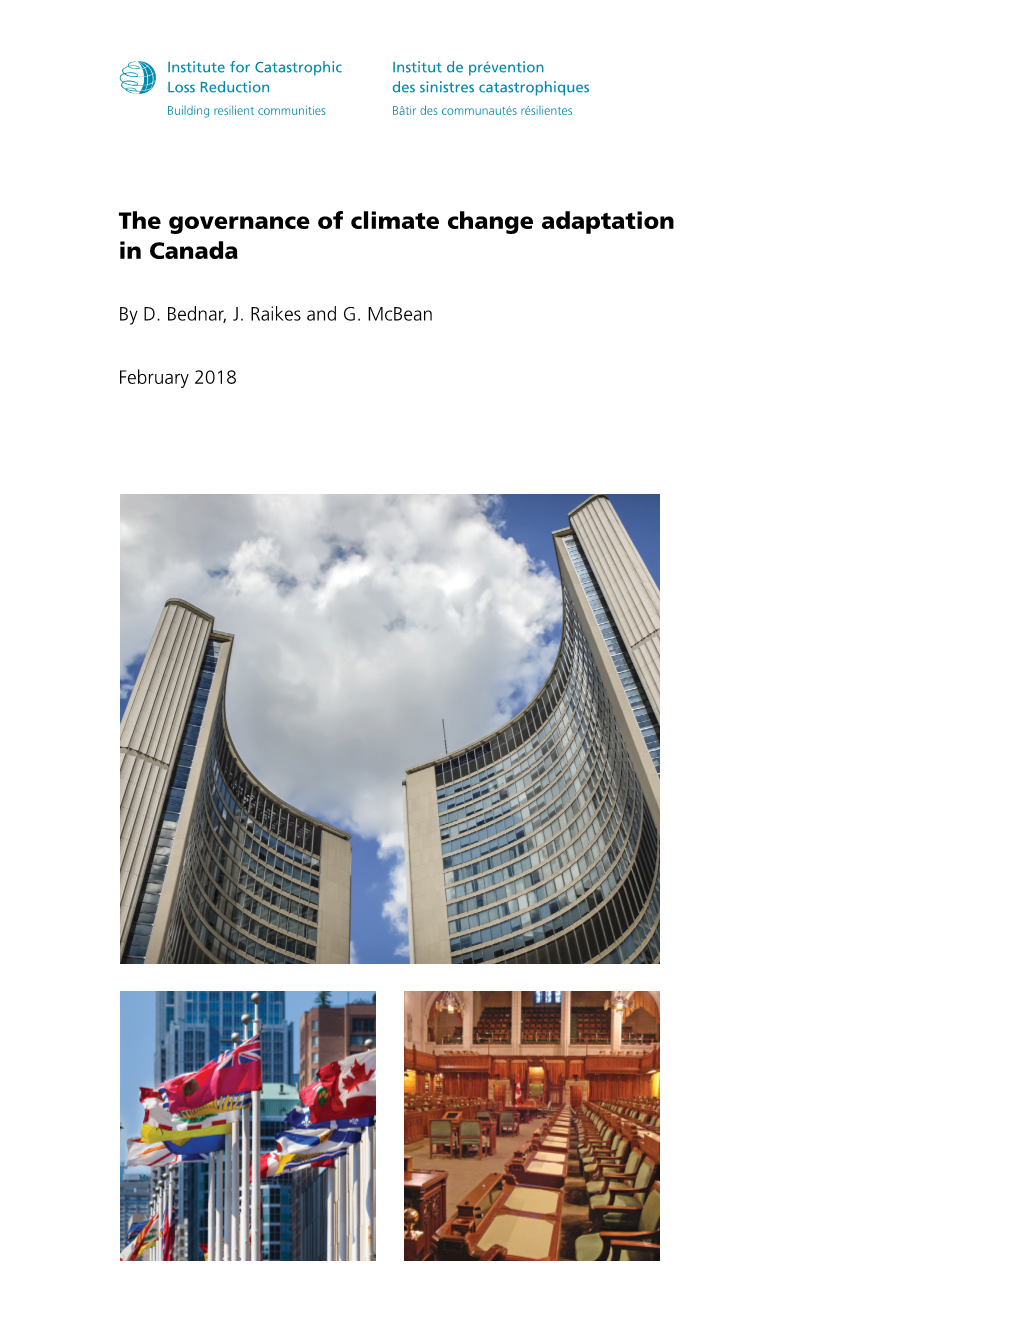 The Governance of Climate Change Adaptation in Canada